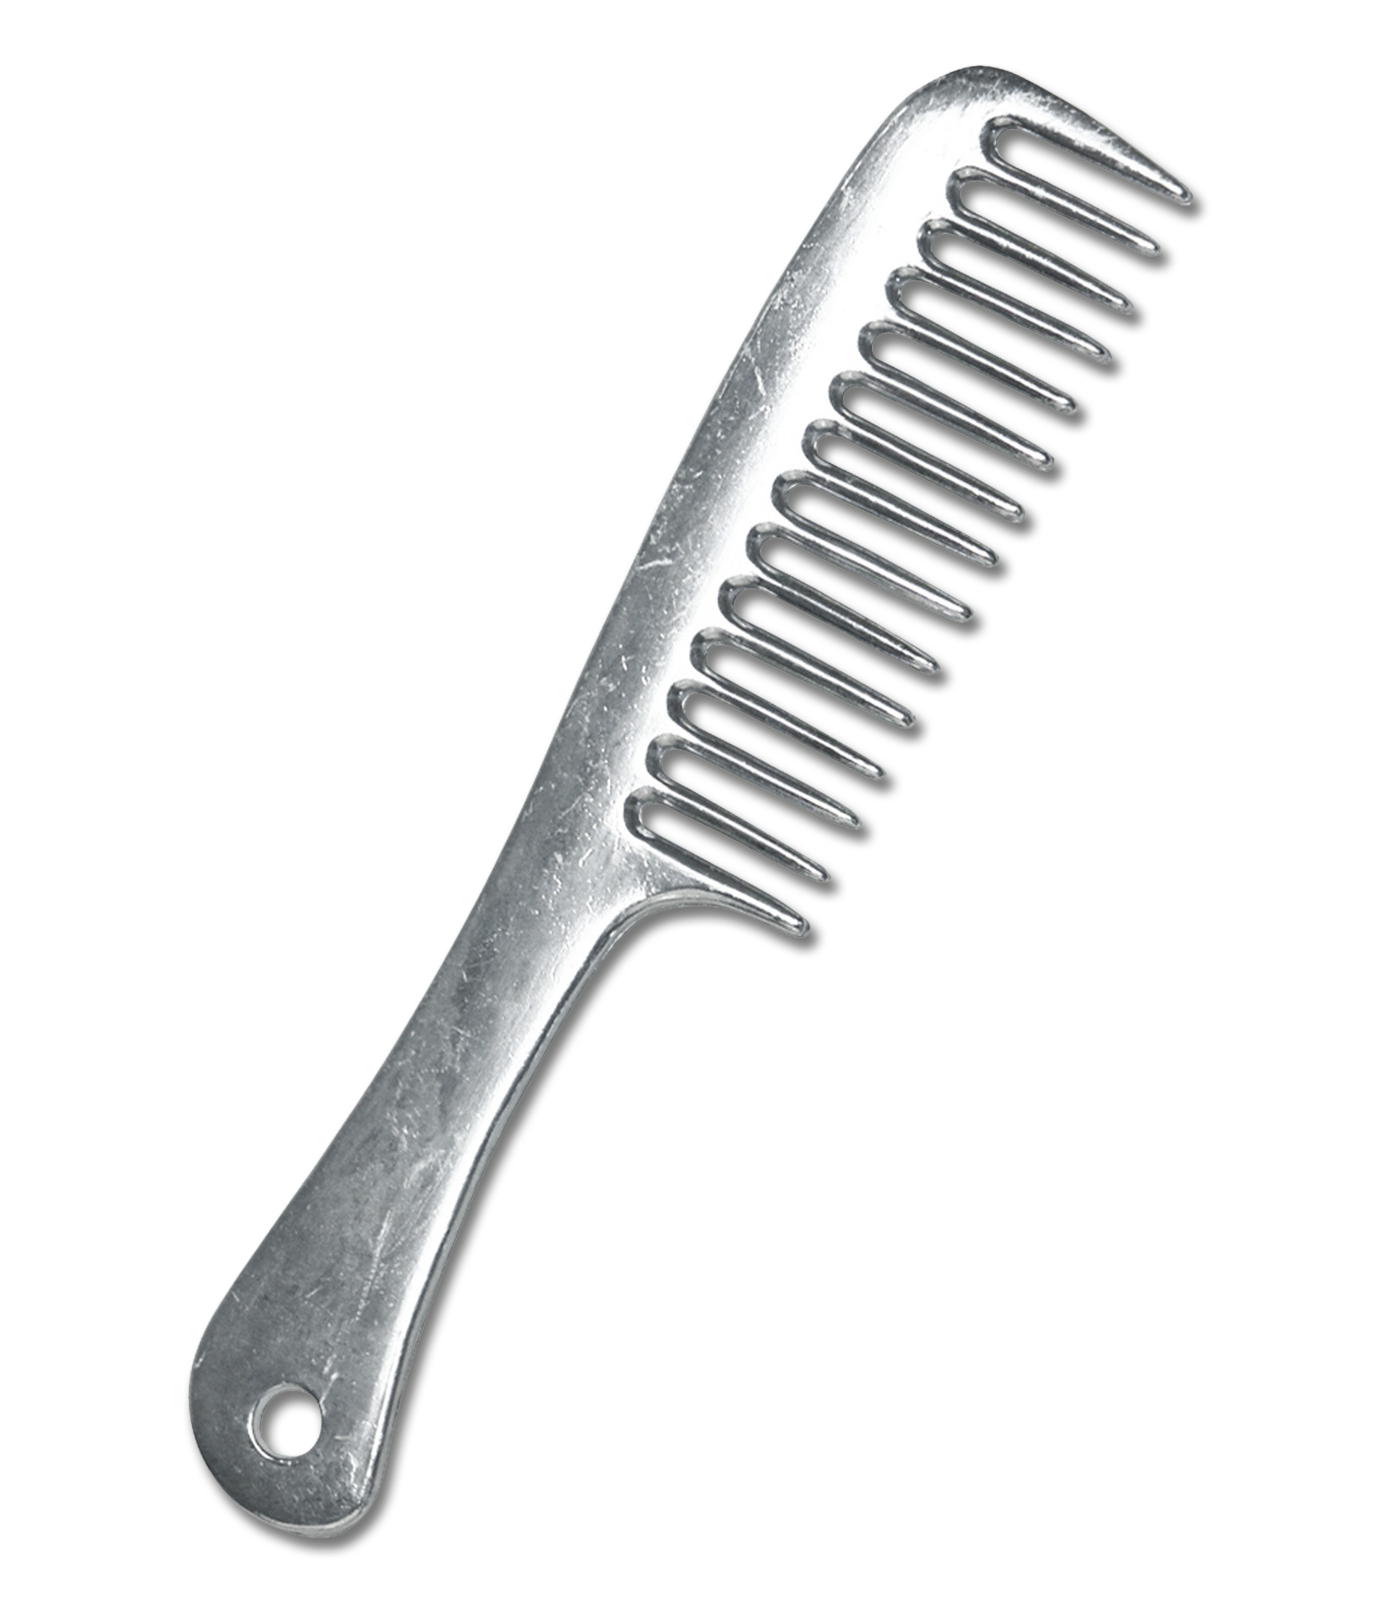 Mane Comb with handle